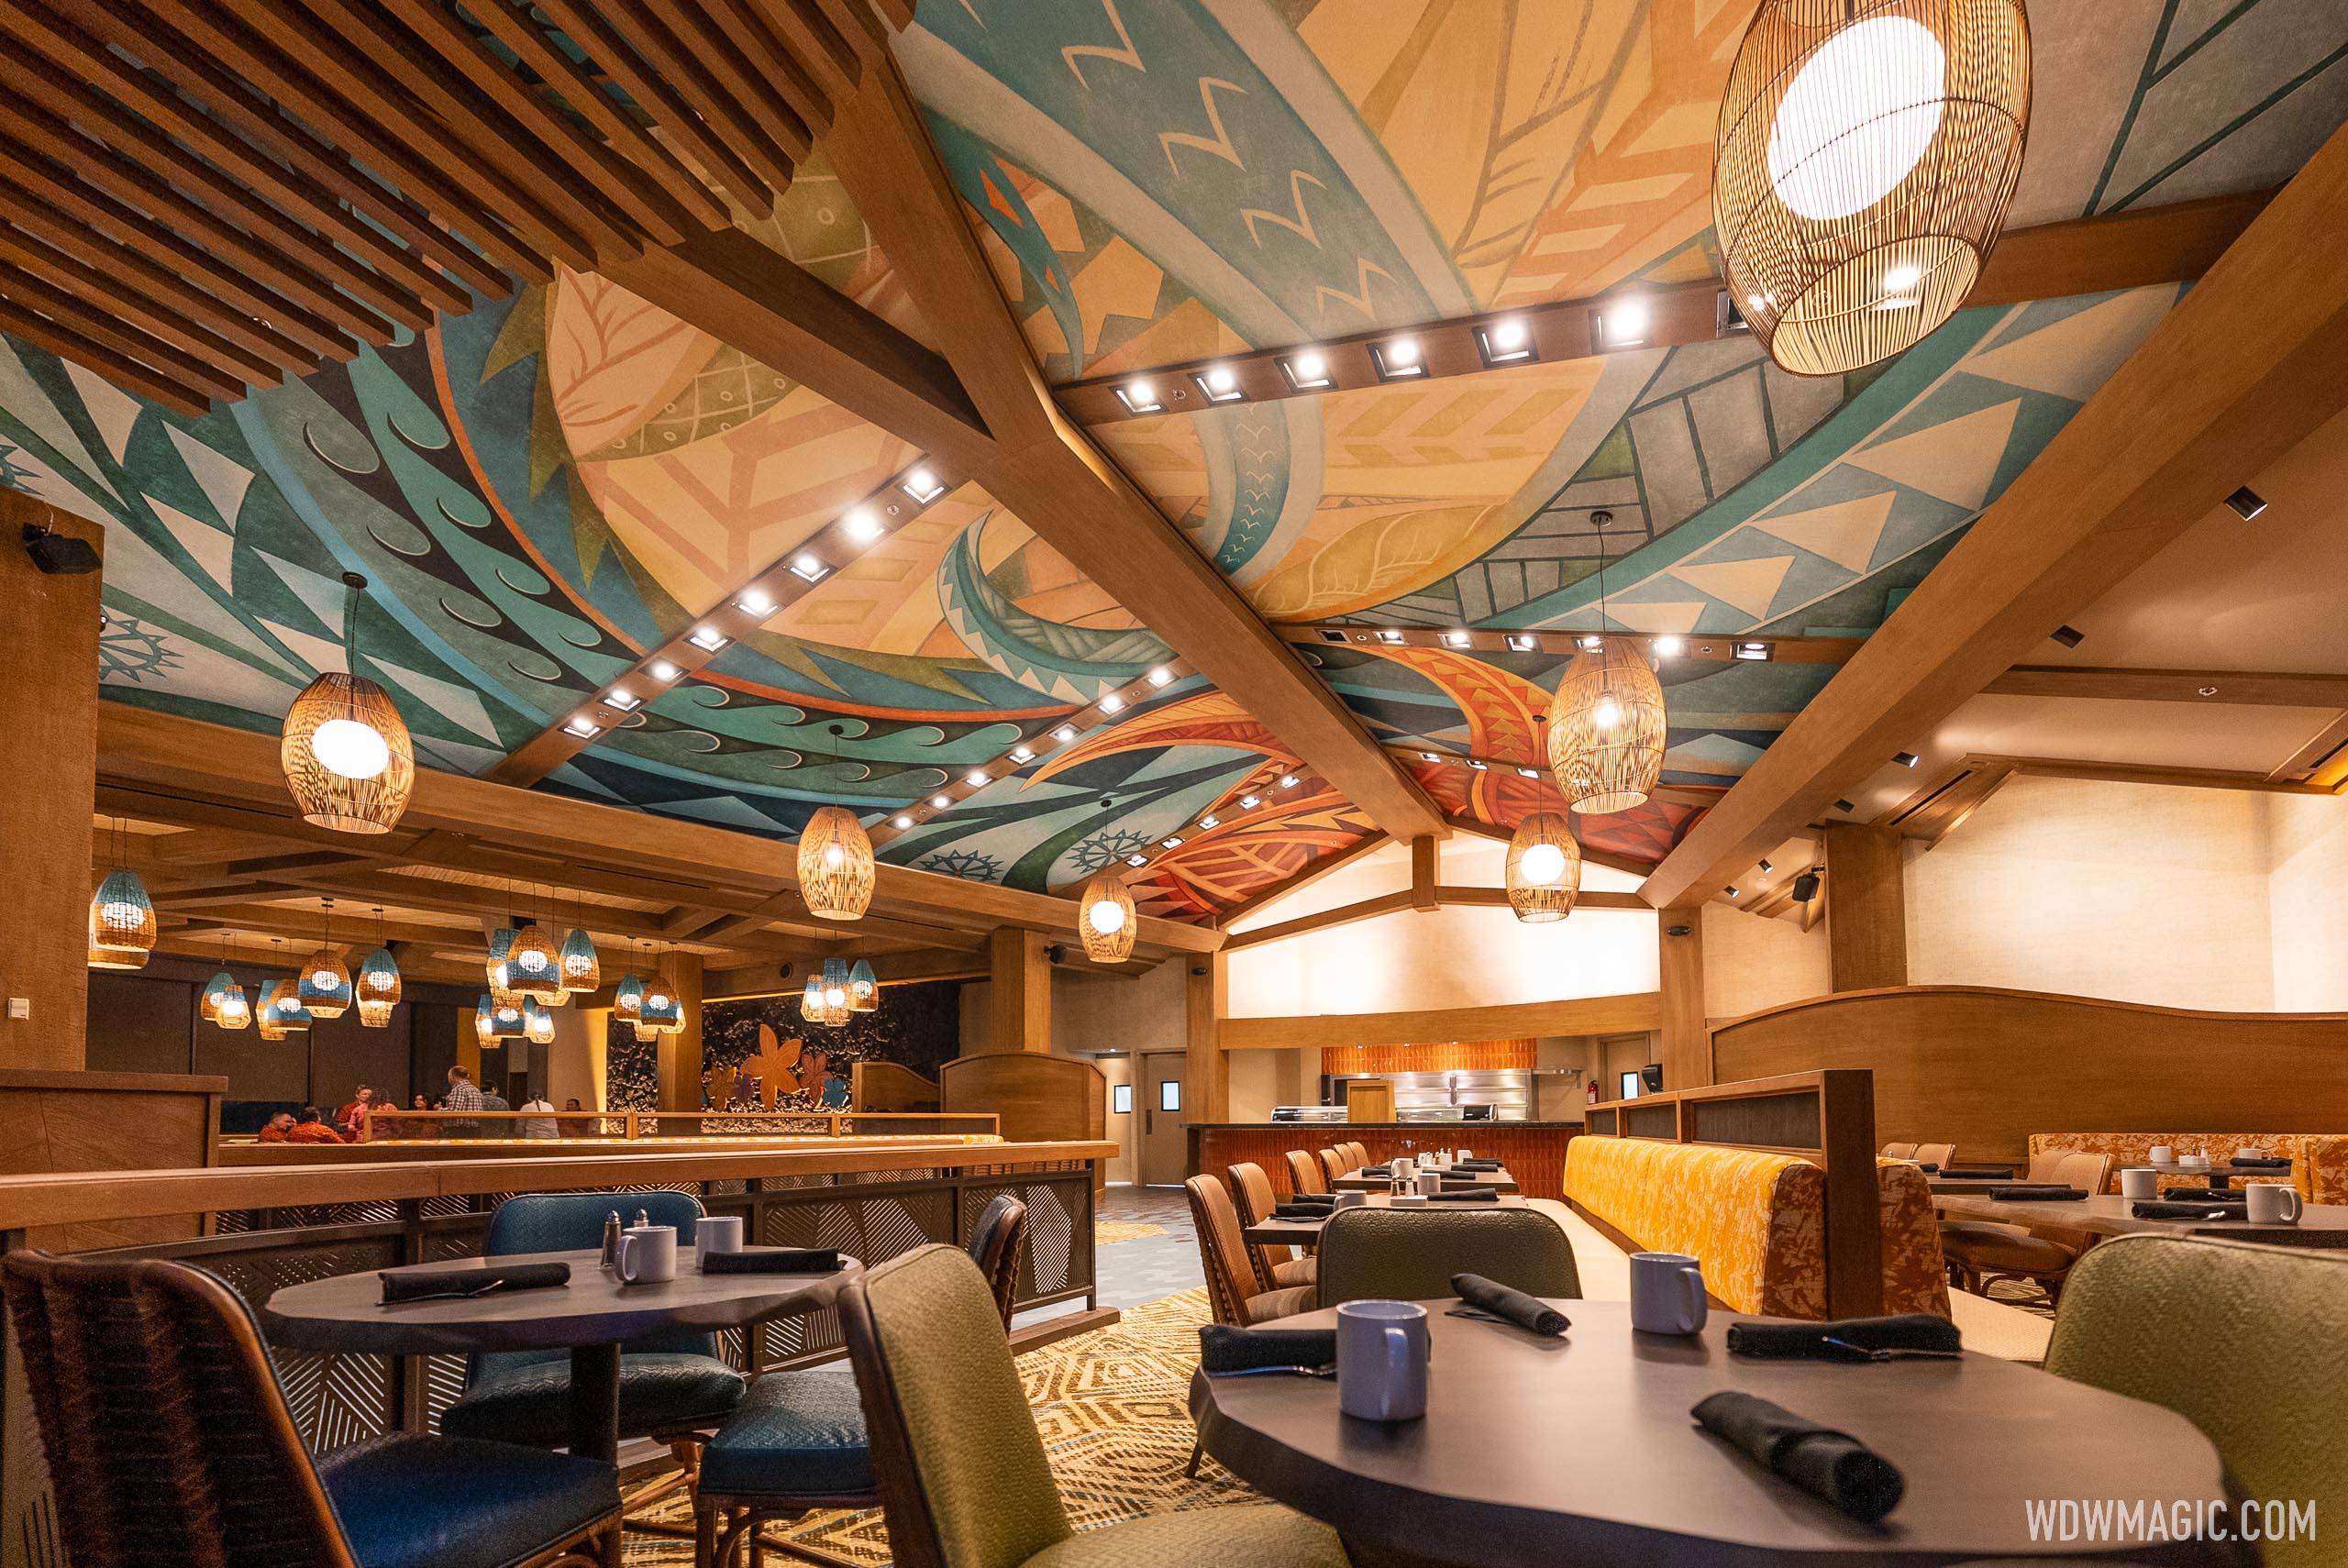 A look inside the completed new-look Kona Cafe at Disney's Polynesian Village Resort